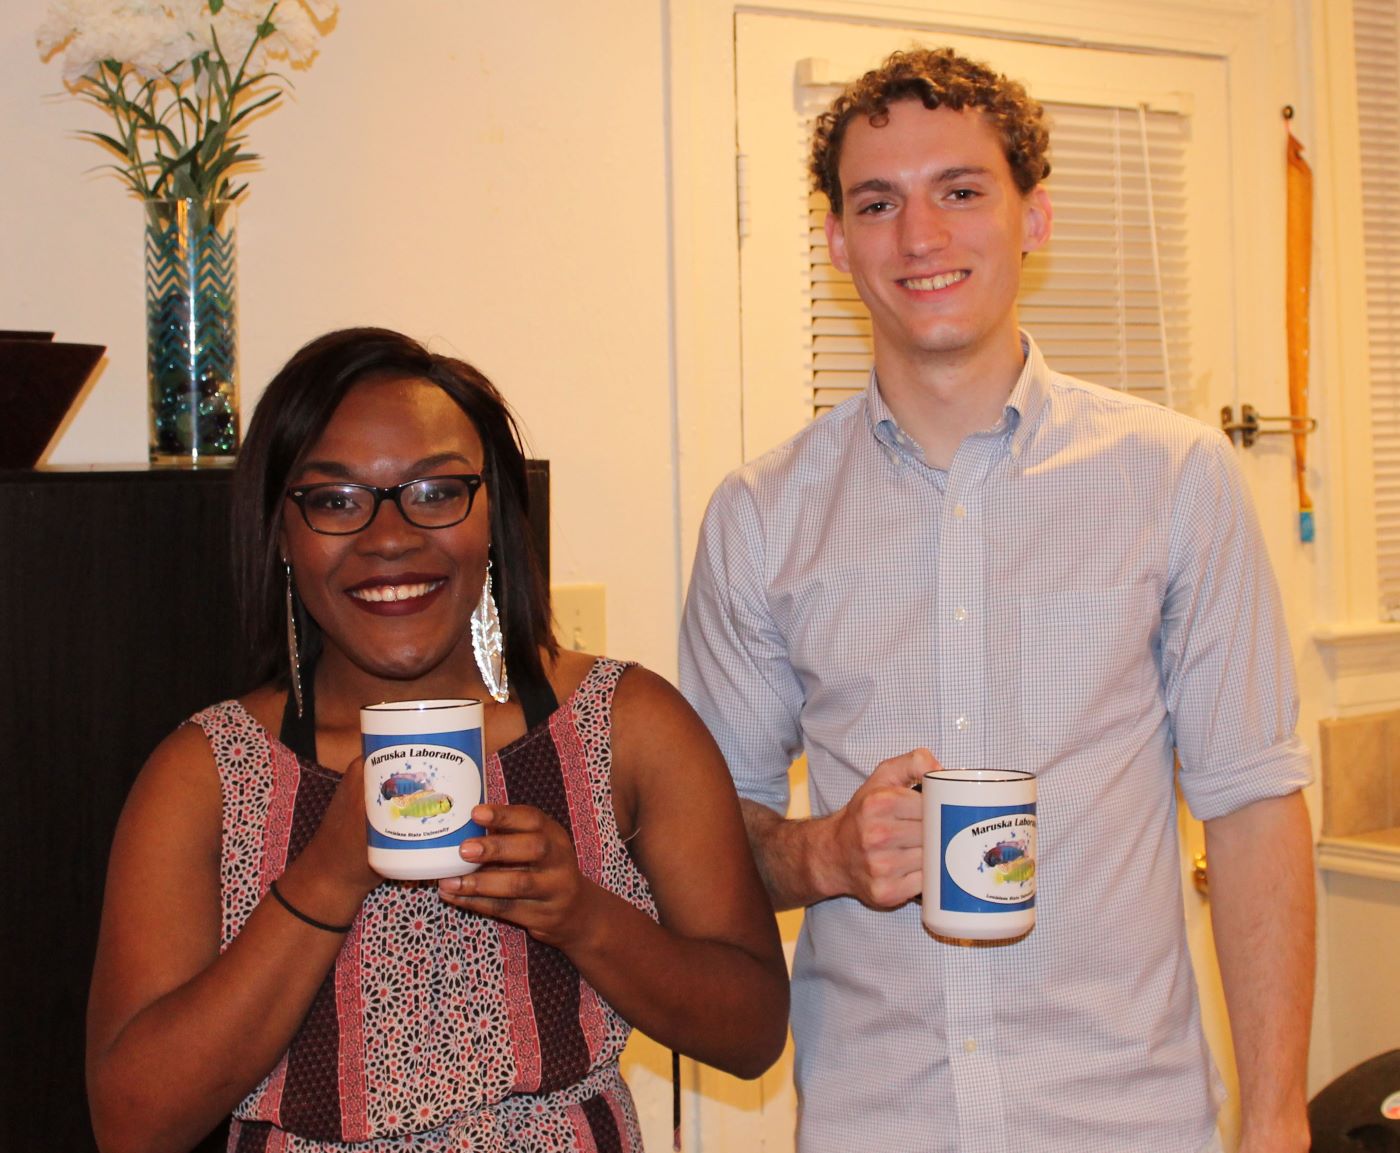 Polly and Christopher graduate and christen their new mugs